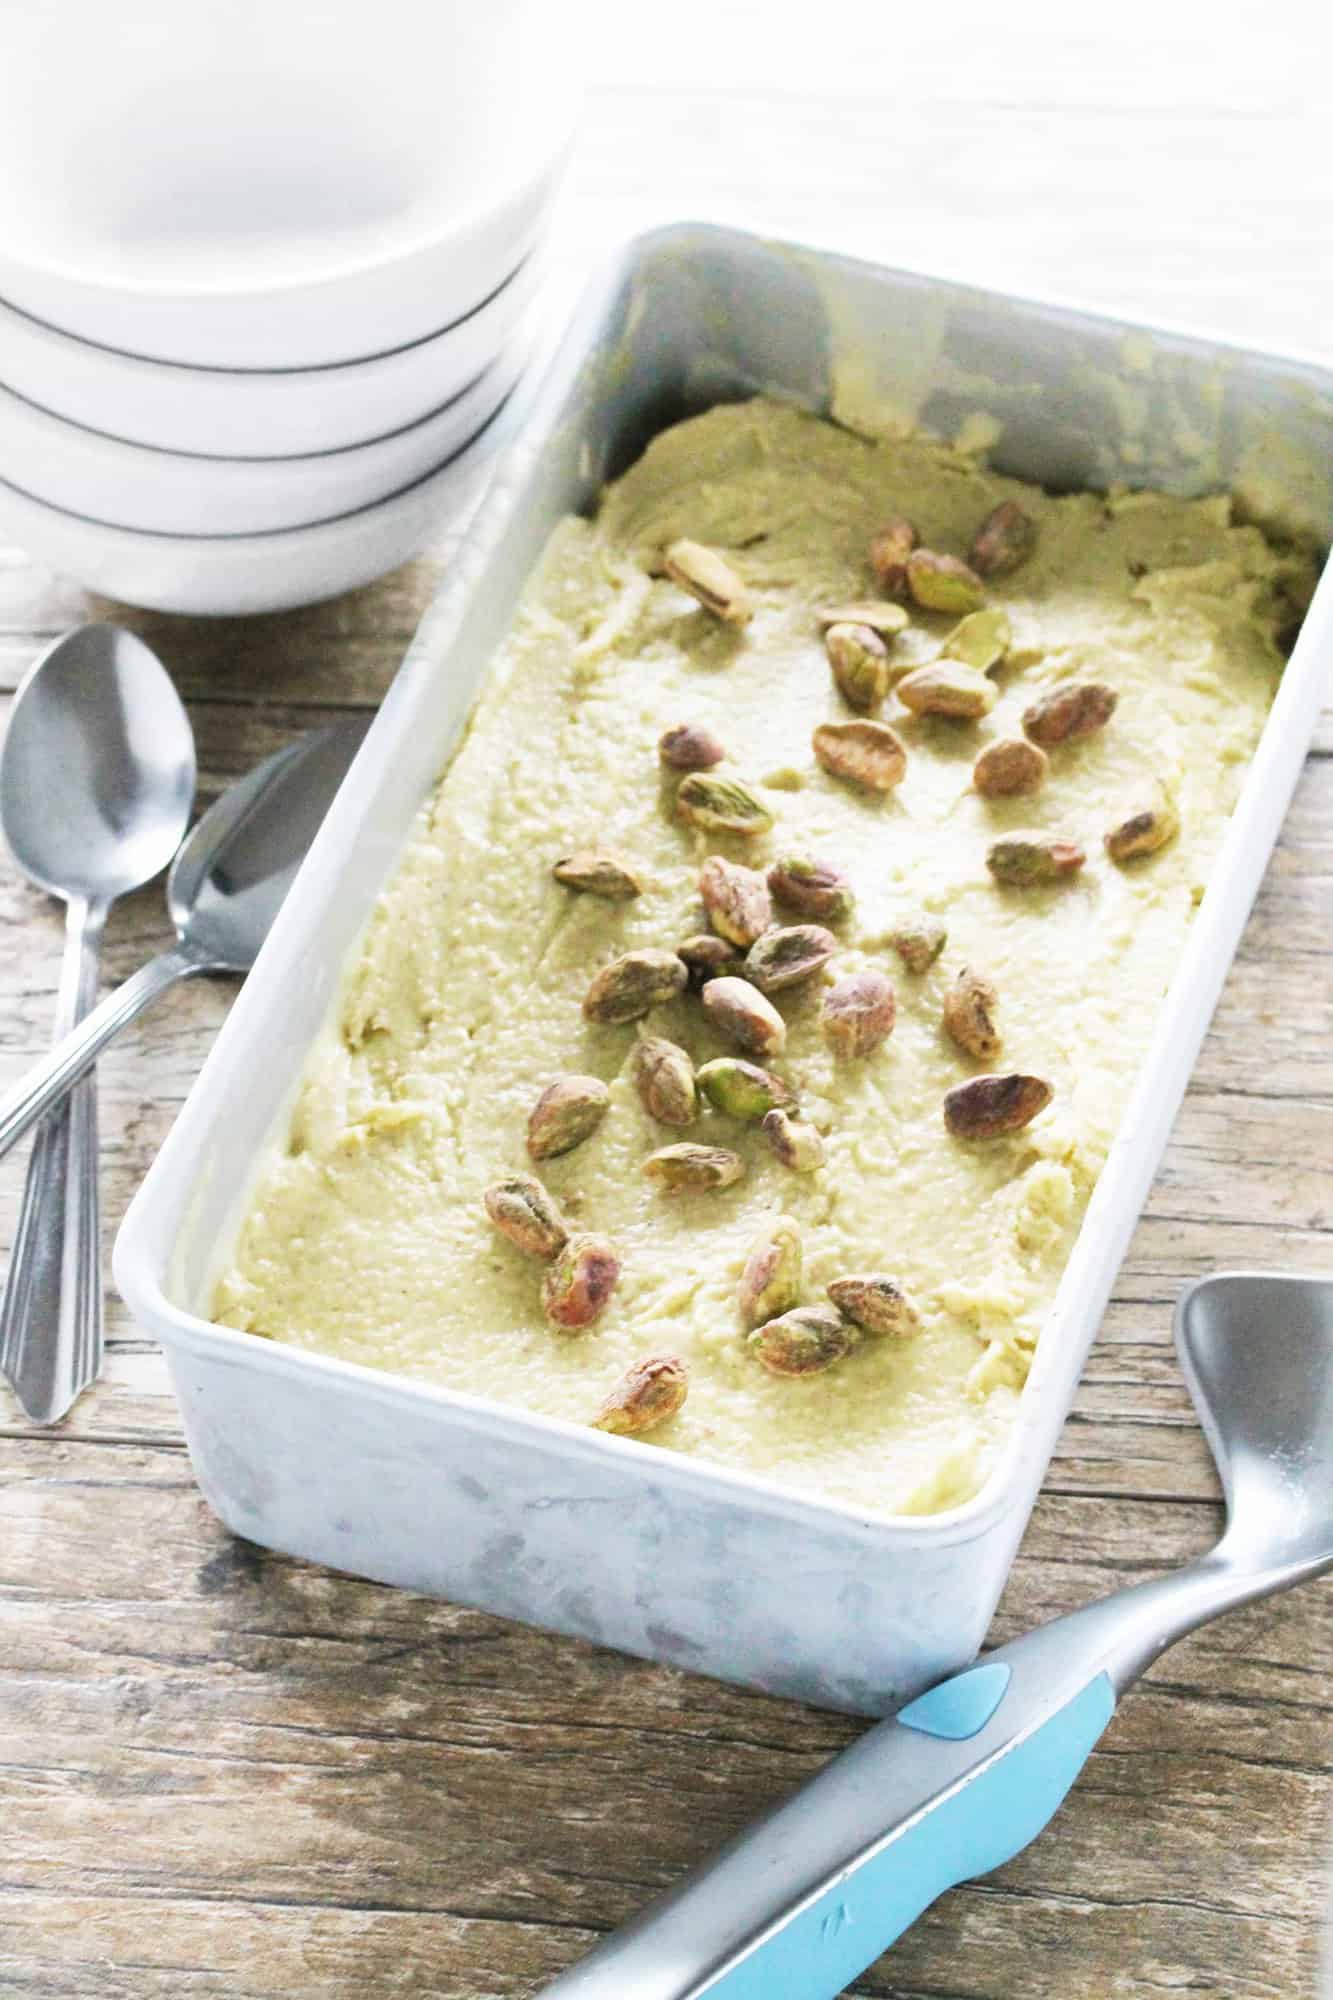 Learn how to make creamy pistachio gelato without the use of an ice cream maker. Make it the old fashioned way: by hand!